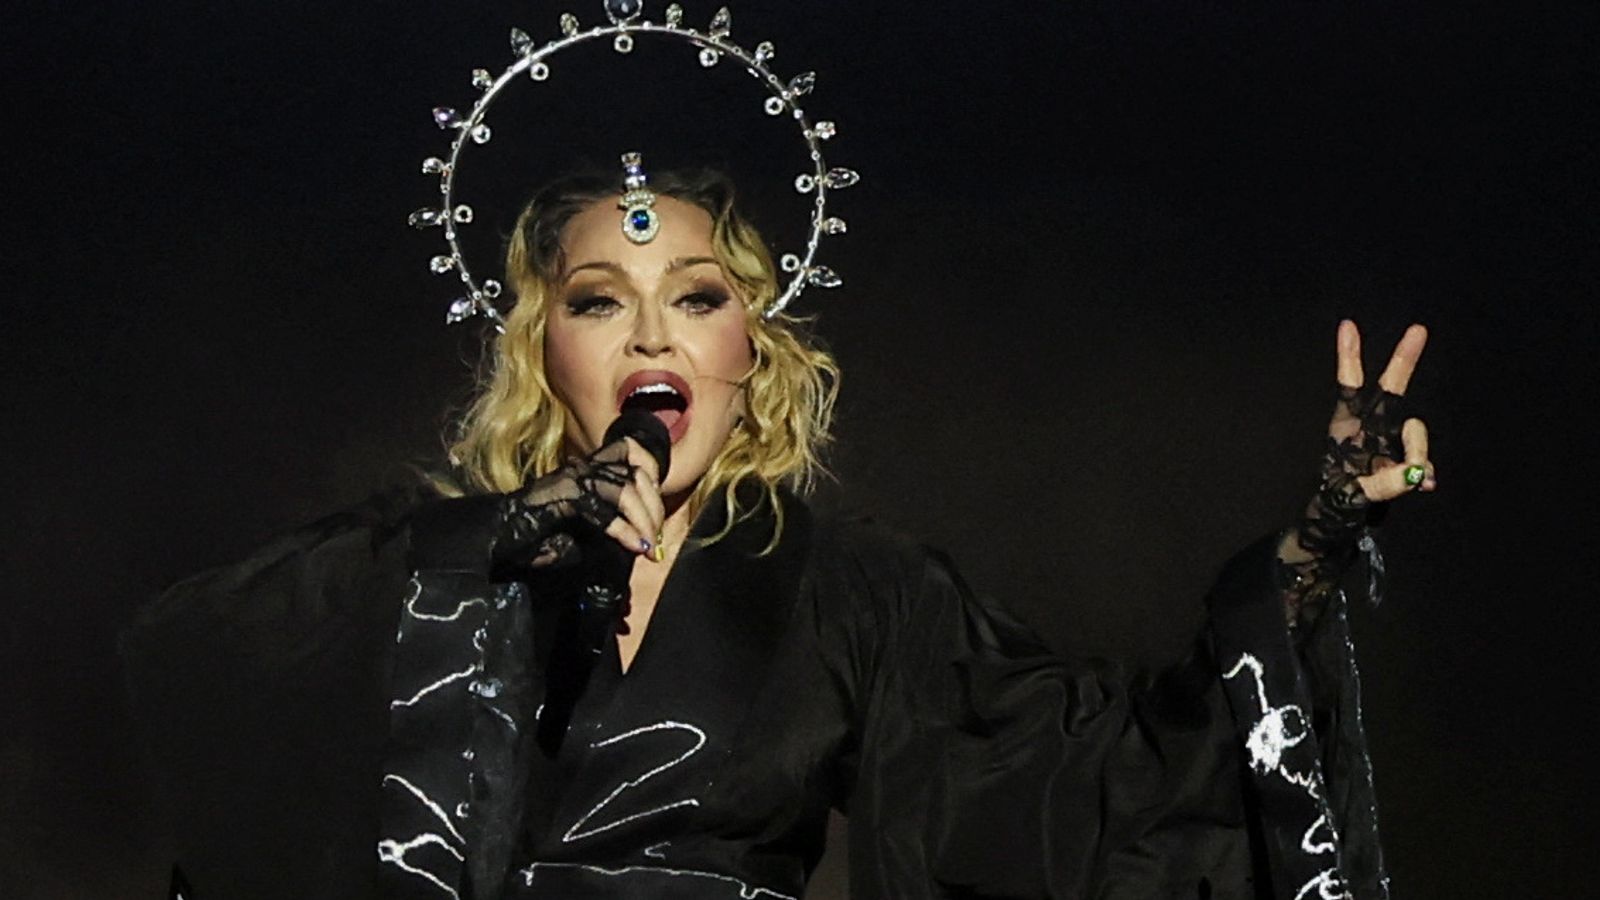 Madonna plays biggest-ever show to 1.6 million fans on Rio's Copacabana beach